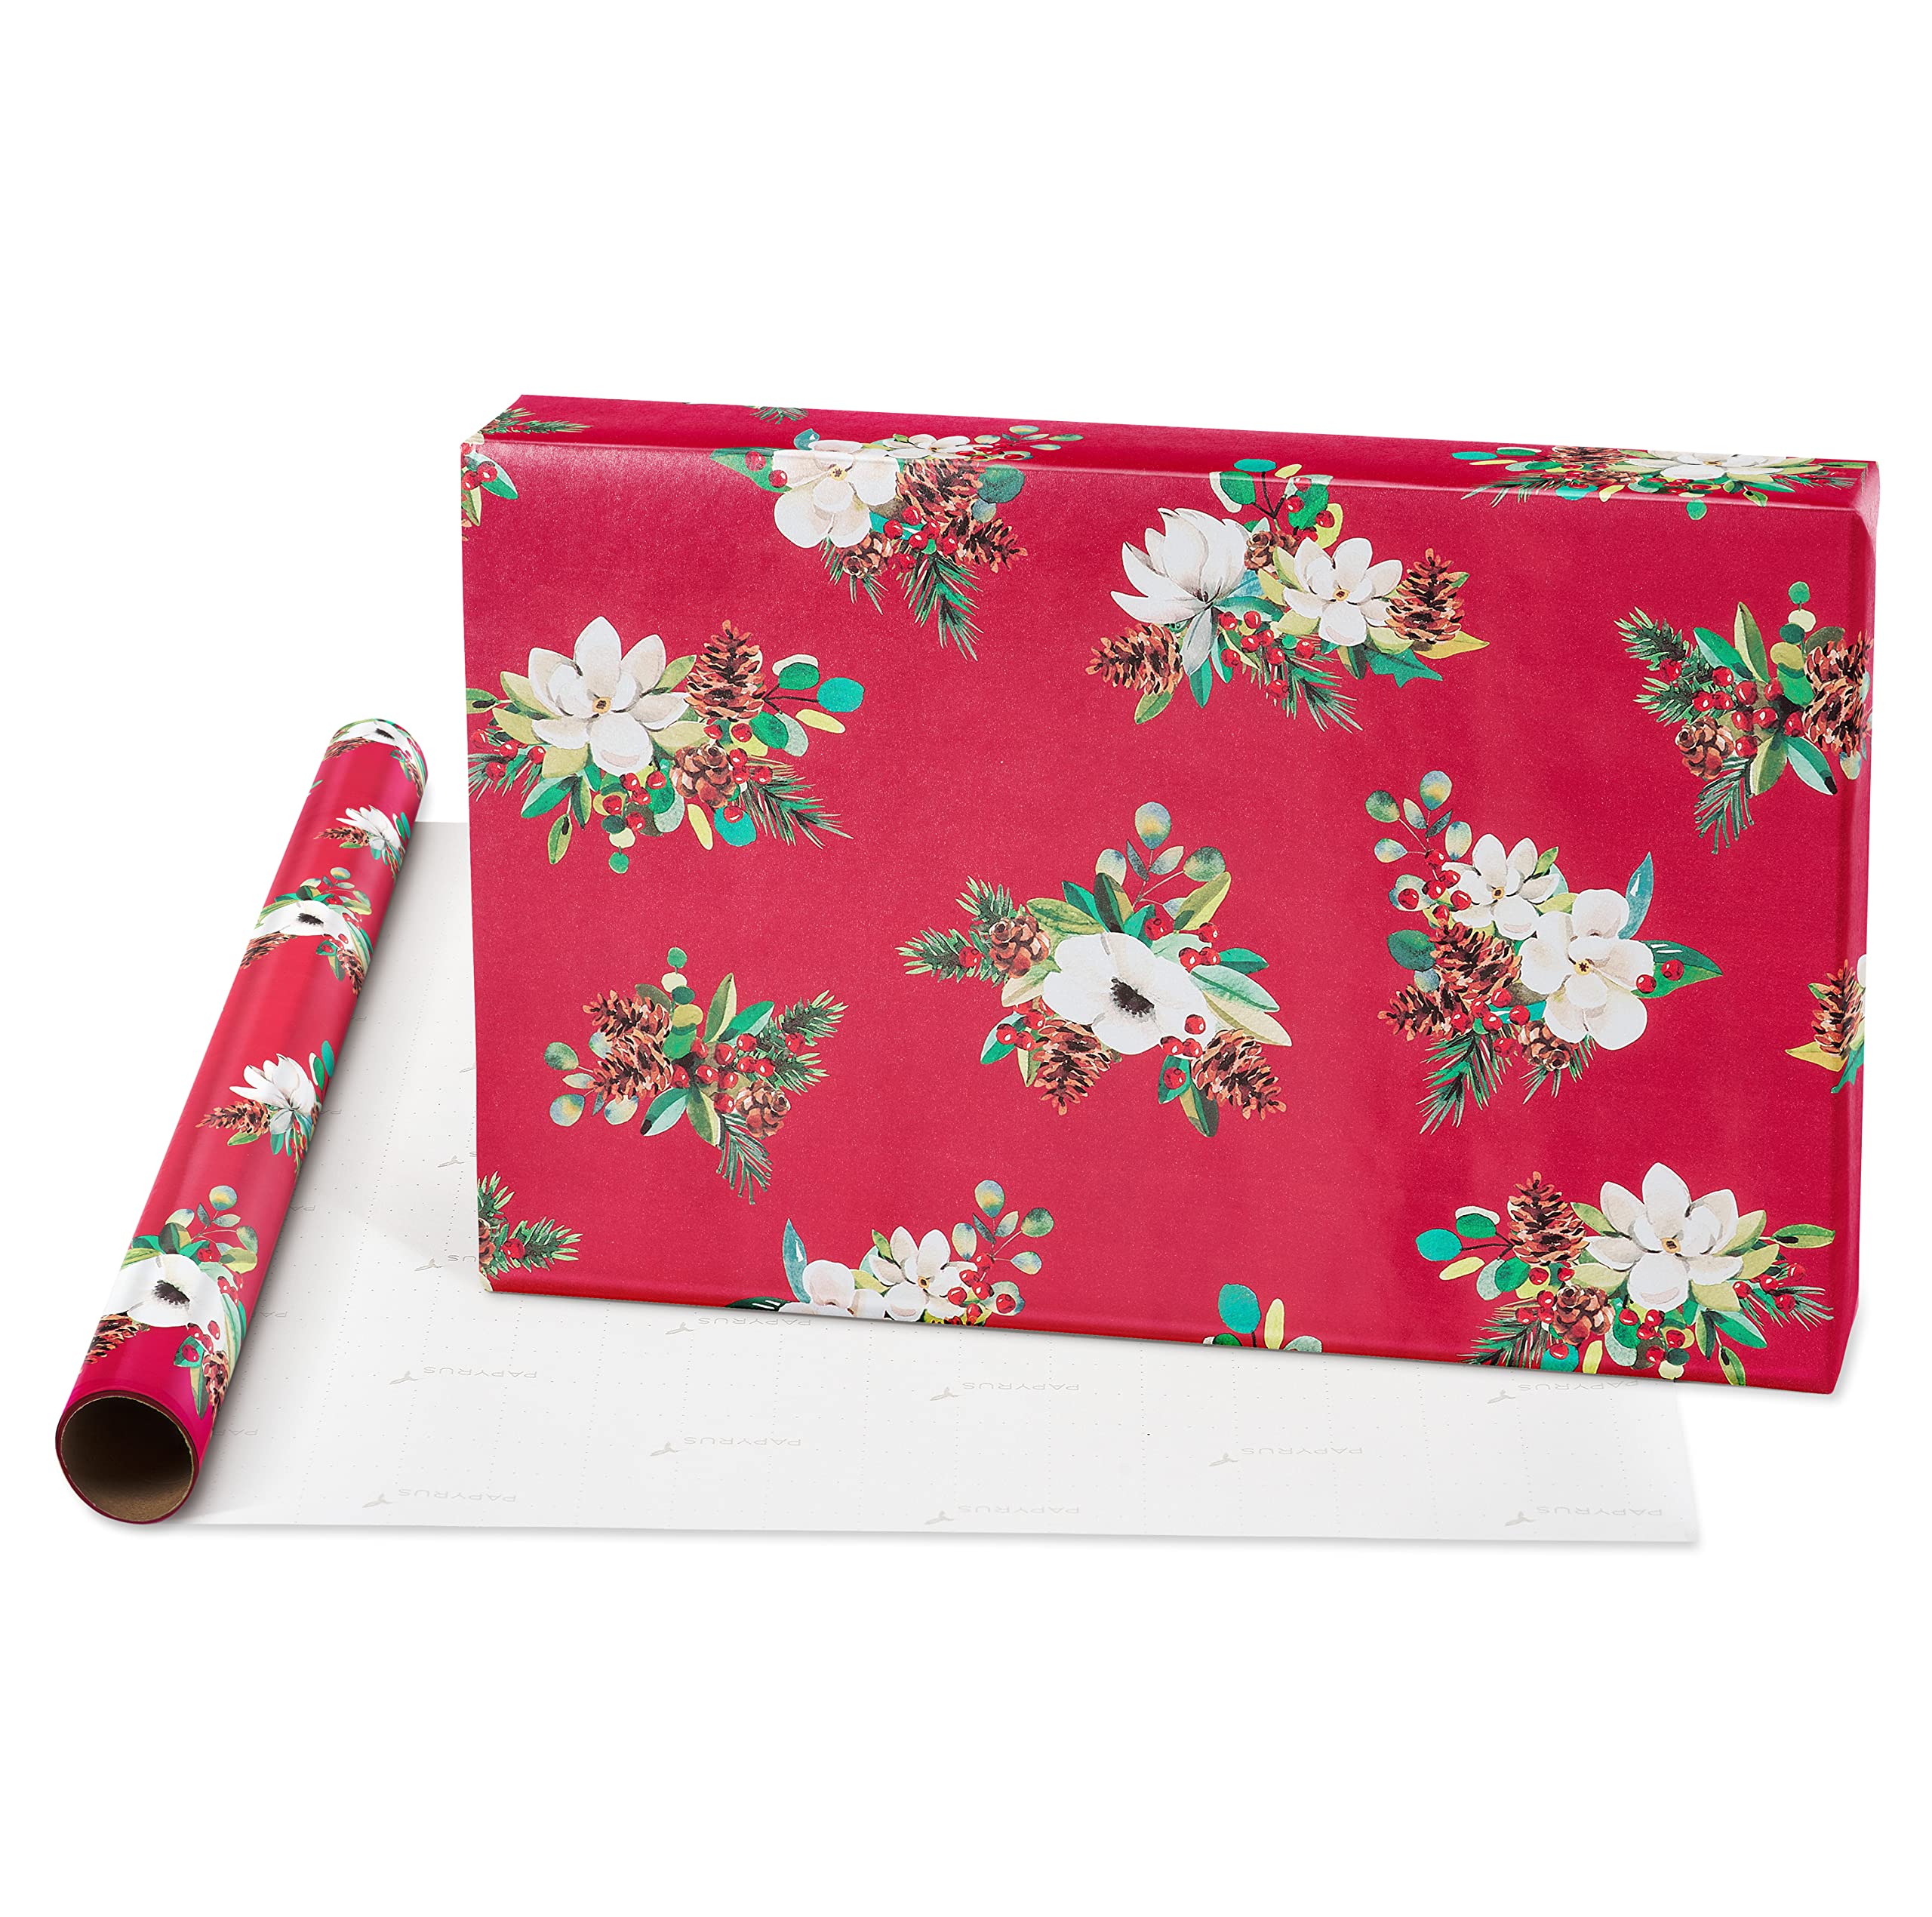 Papyrus Christmas Wrapping Paper Bundle, Gold Holly, Christmas Trees, White Floral (3 Rolls 70 sq. ft)